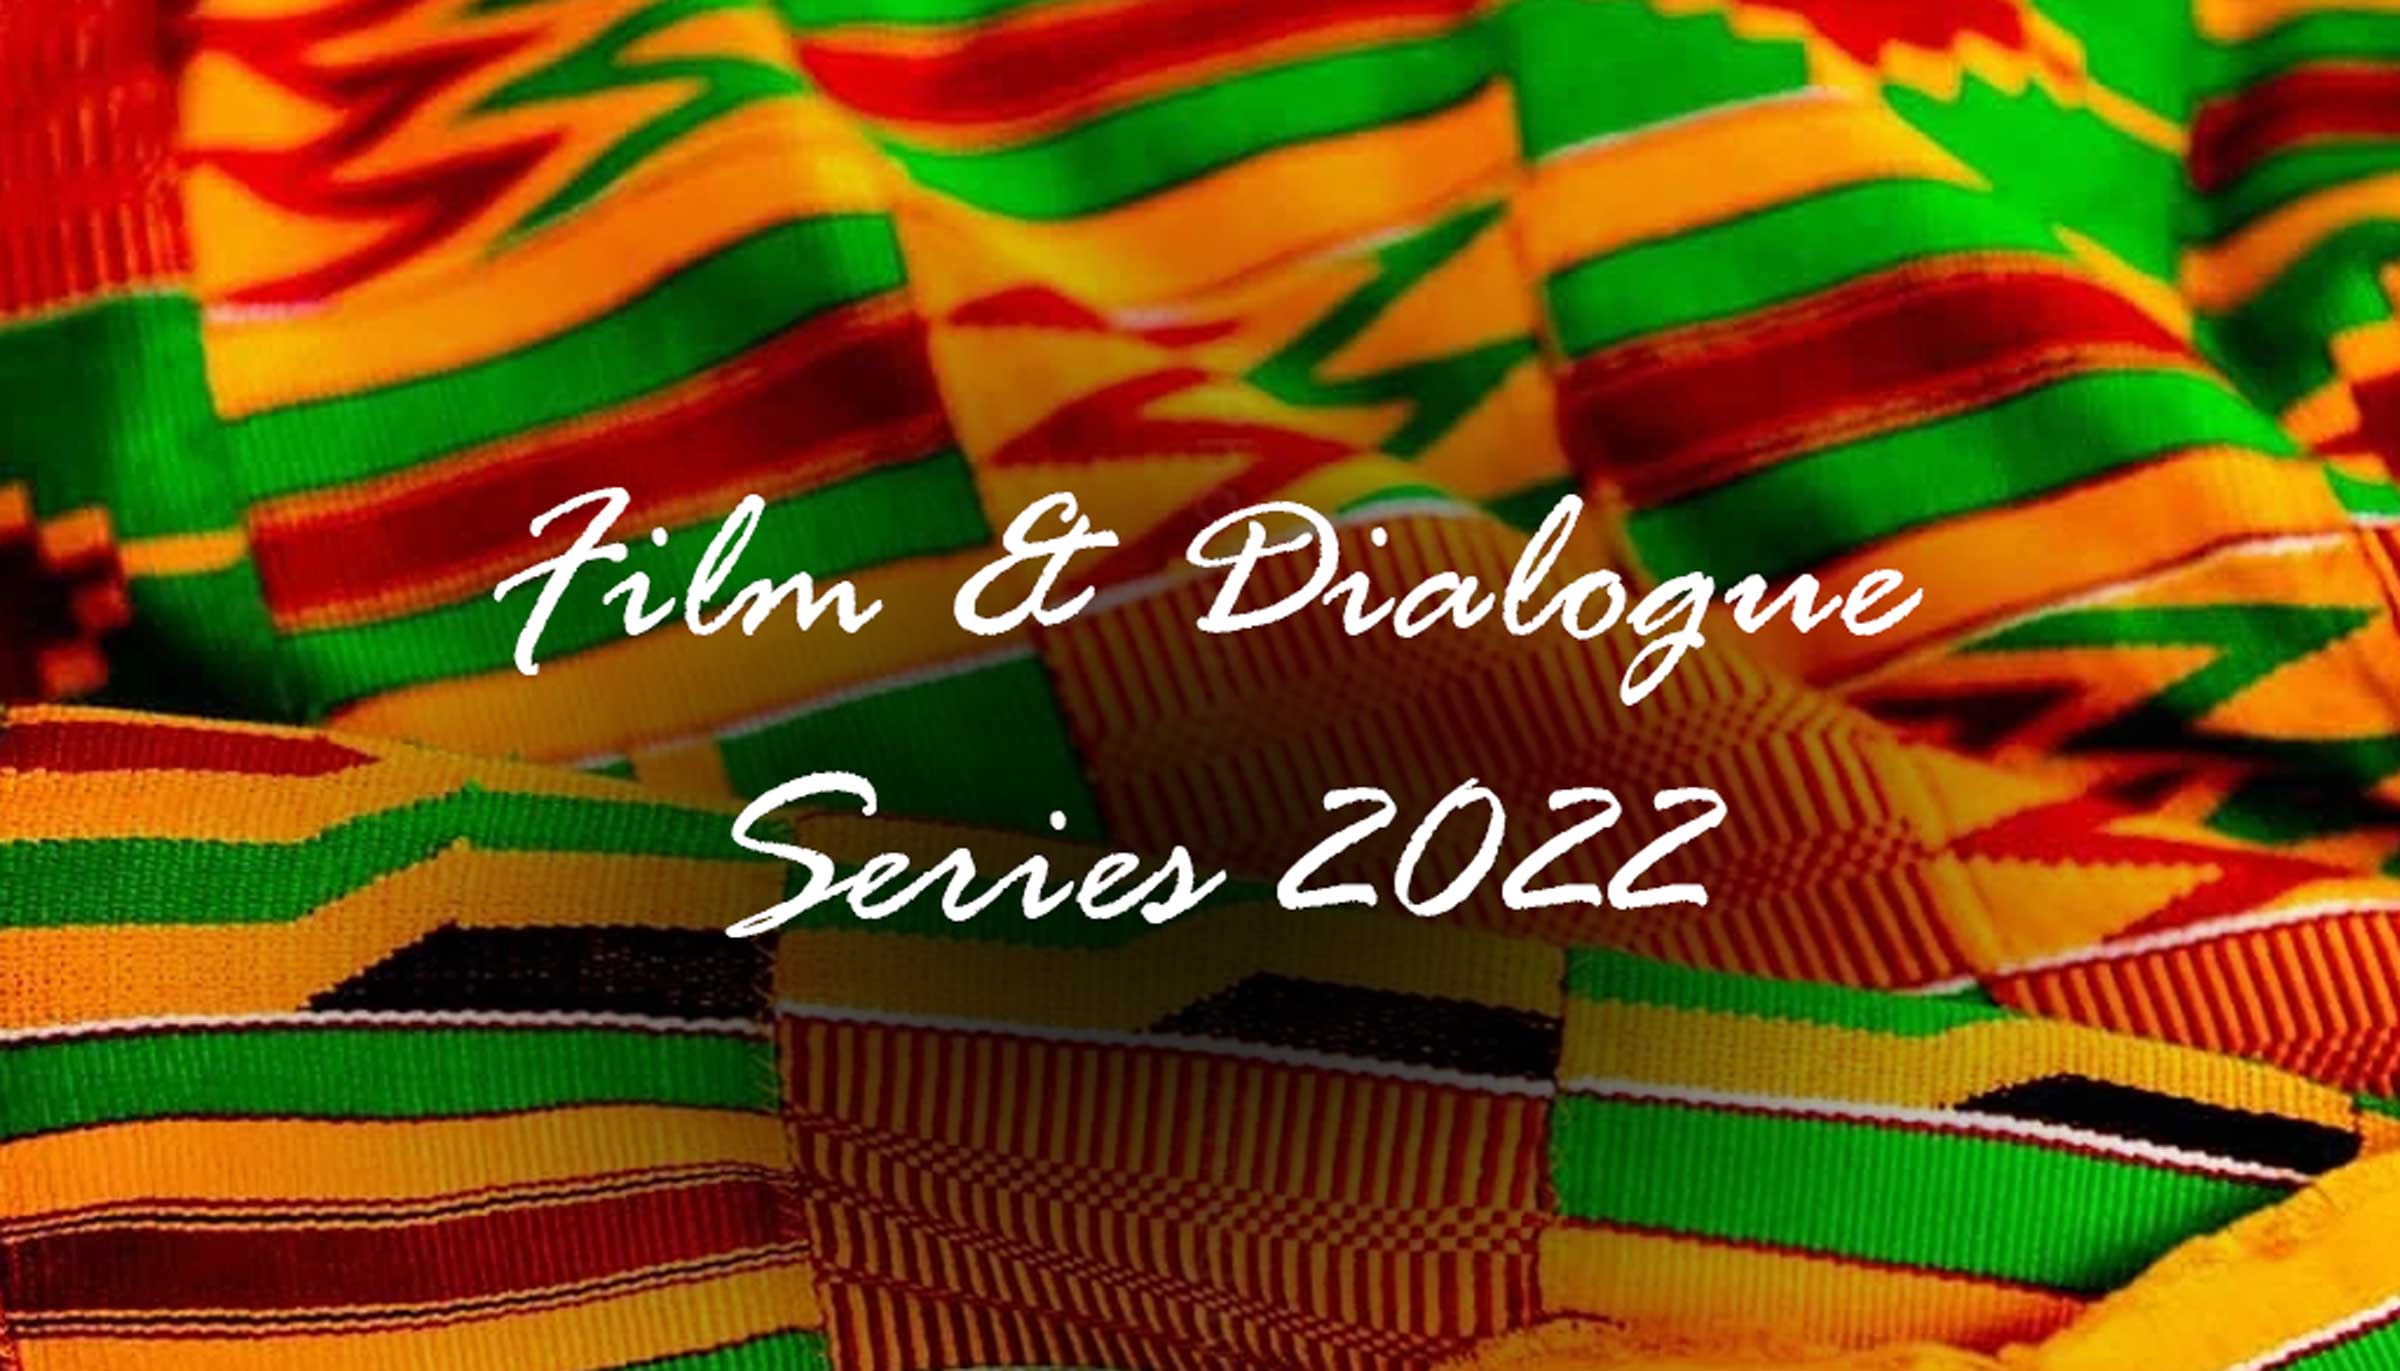 All-African People's Revolutionary Party Film & Dialogue Series 2022